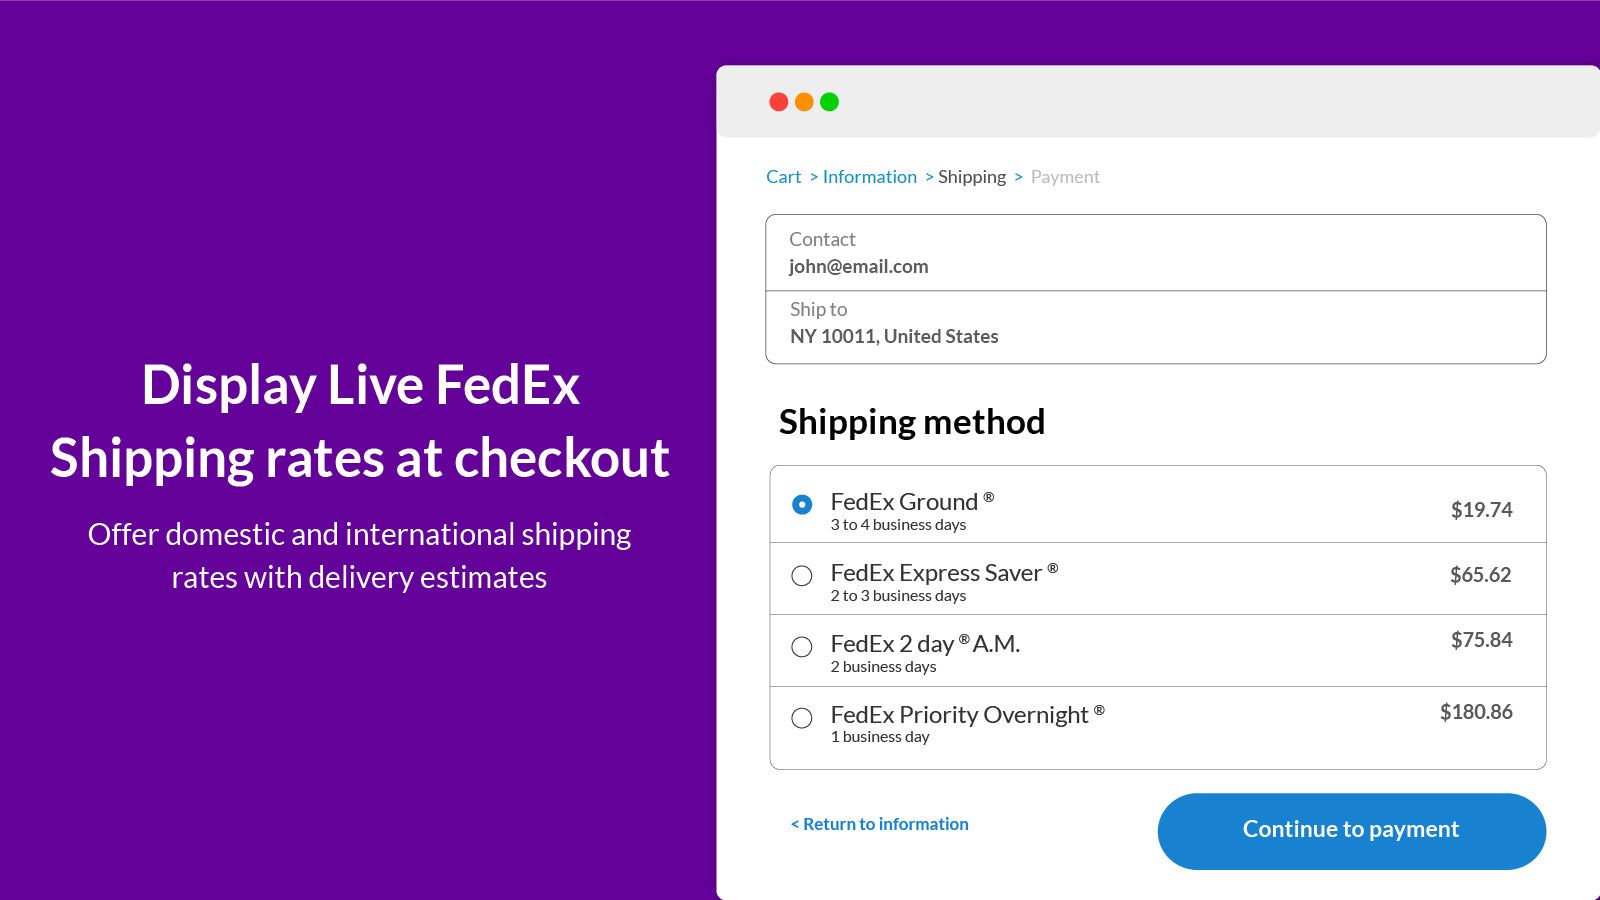 Display Live FedEx Rates on the Checkout page